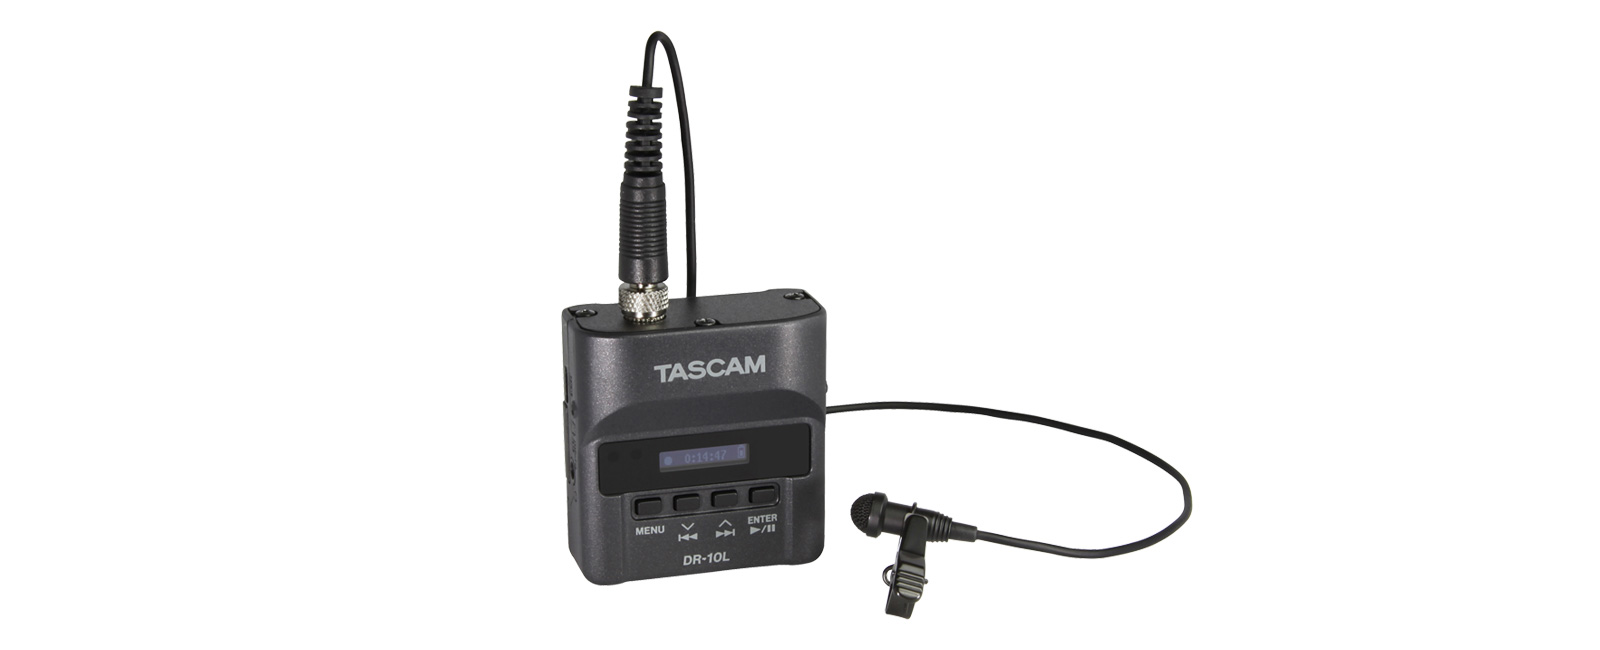 TASCAM Powerful Features Set the Standard in the Ultra-Compact DR-10L